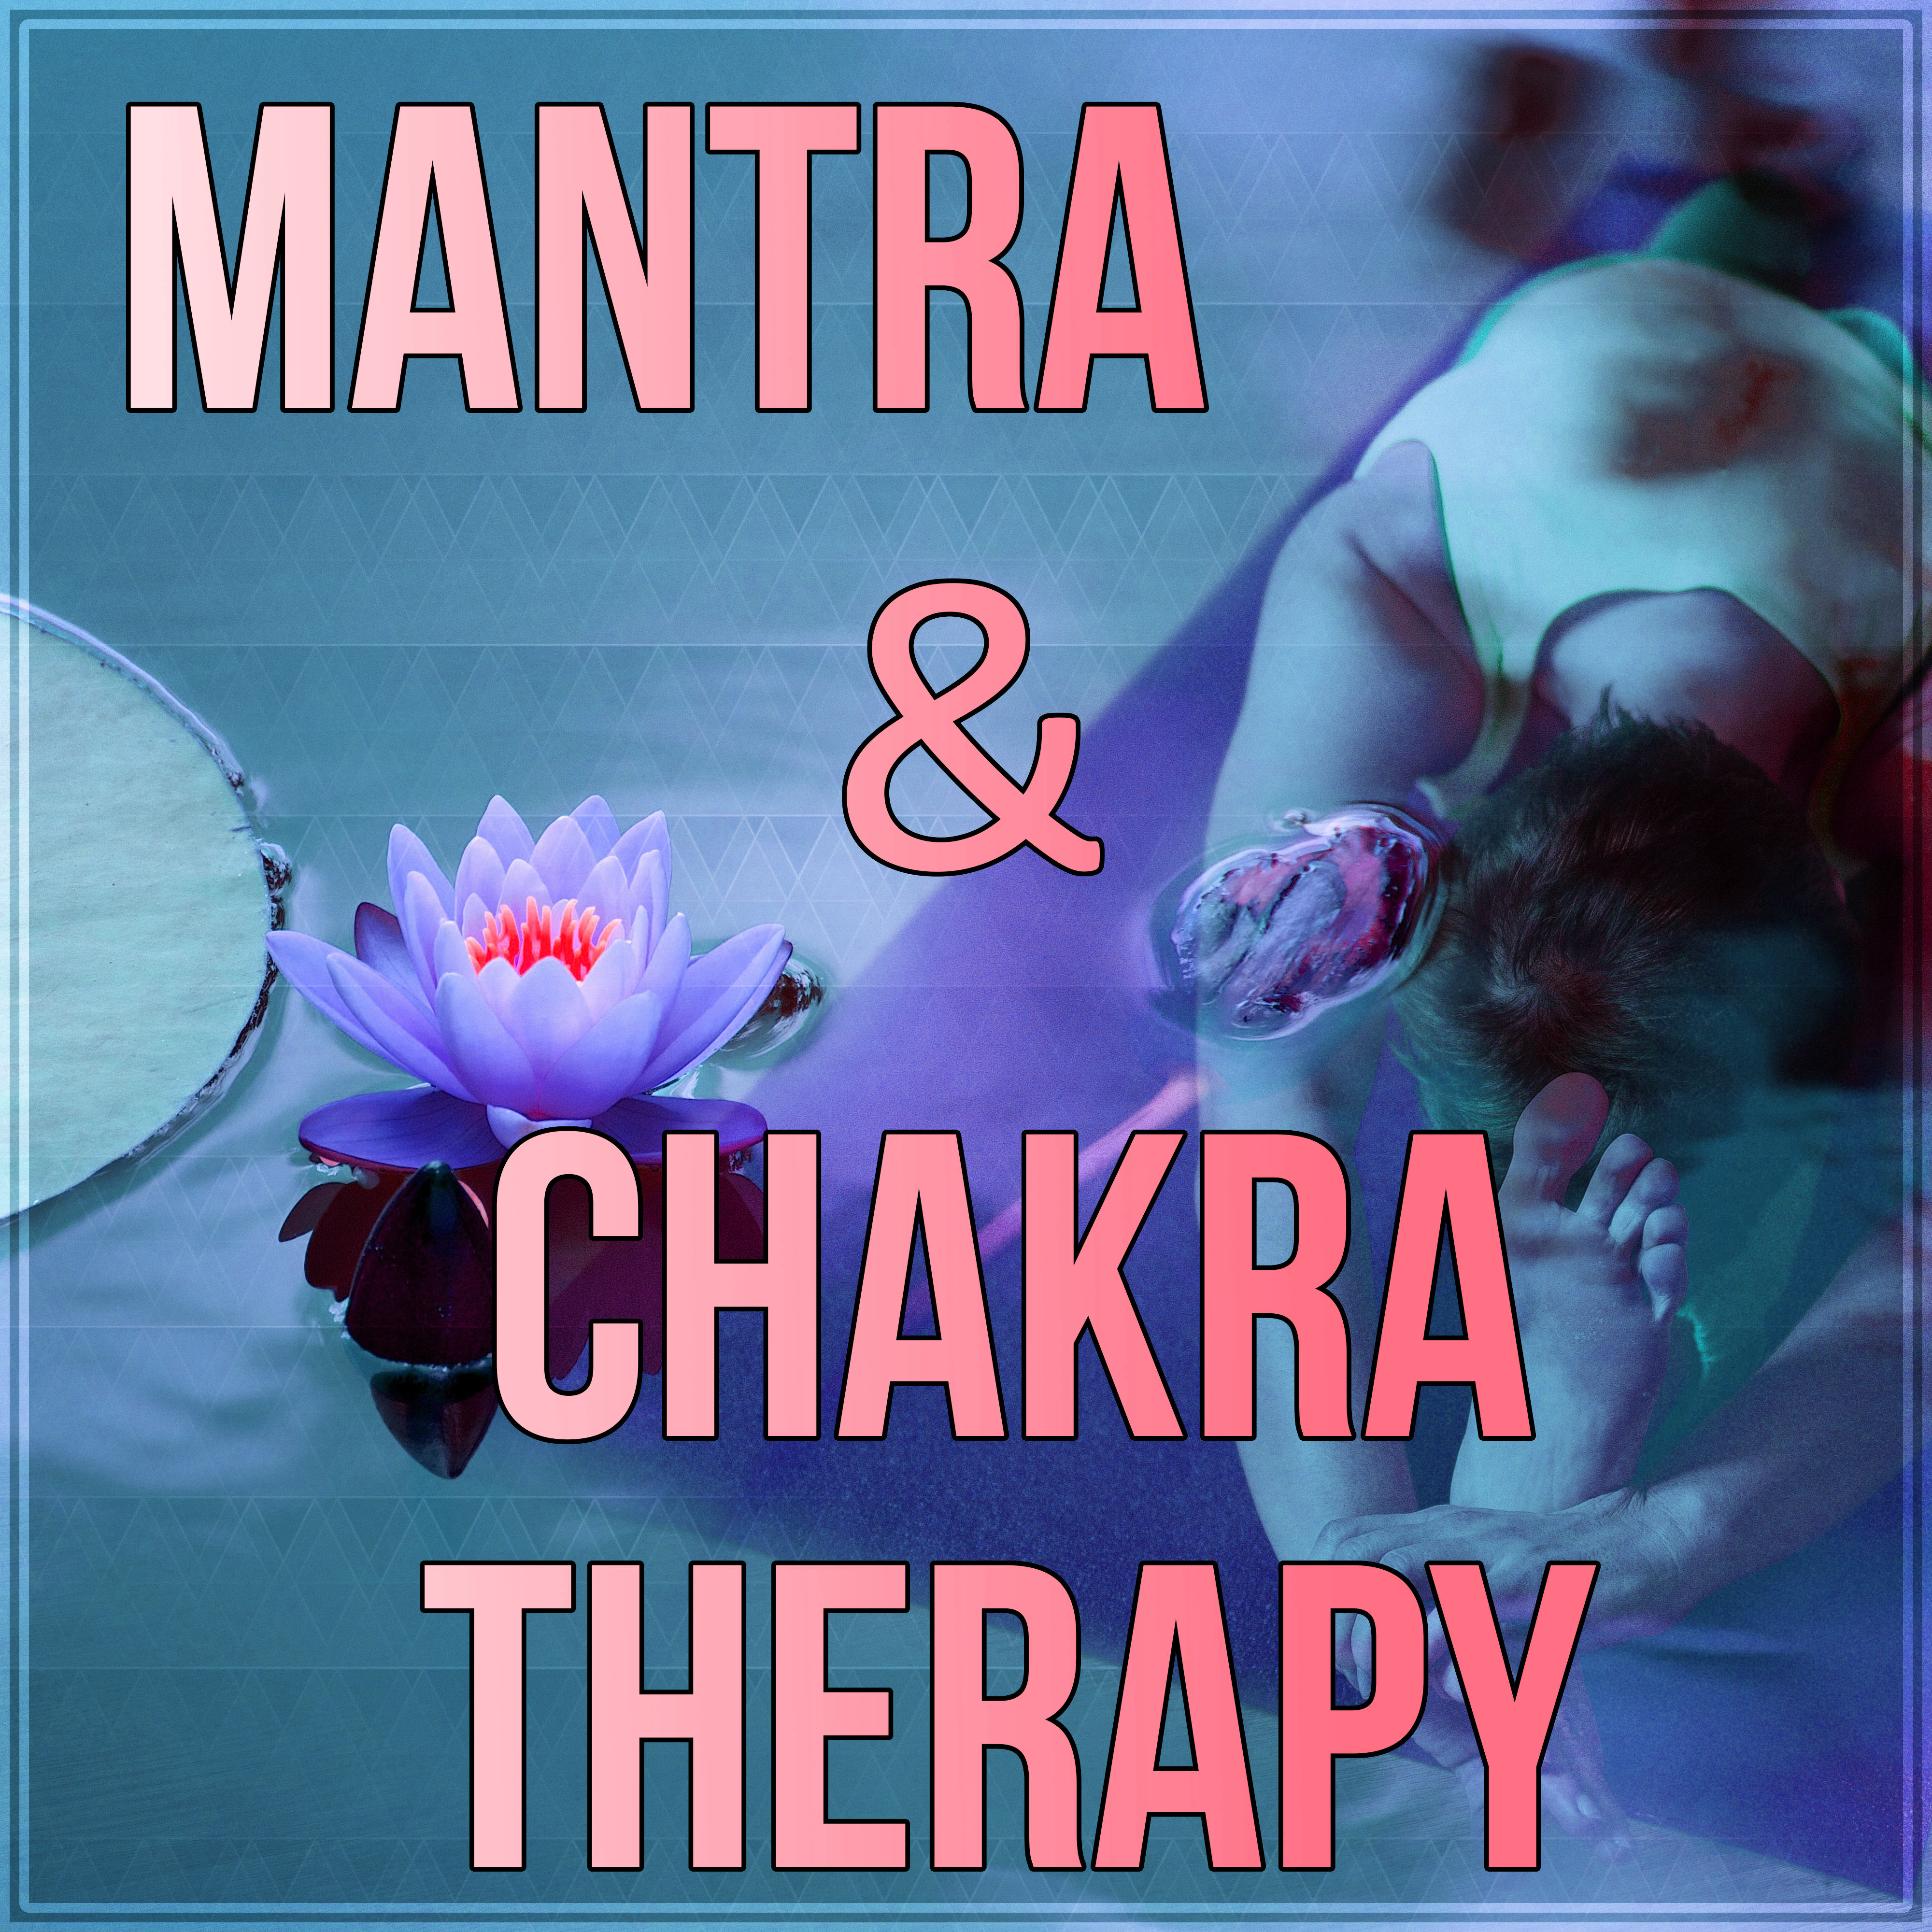 Mantra & Chakra Therapy – Relaxing Music for Serenity, Tranquility Spa, Calm, Magnetic Moments with Nature Sounds, Om Chanting, Health Care